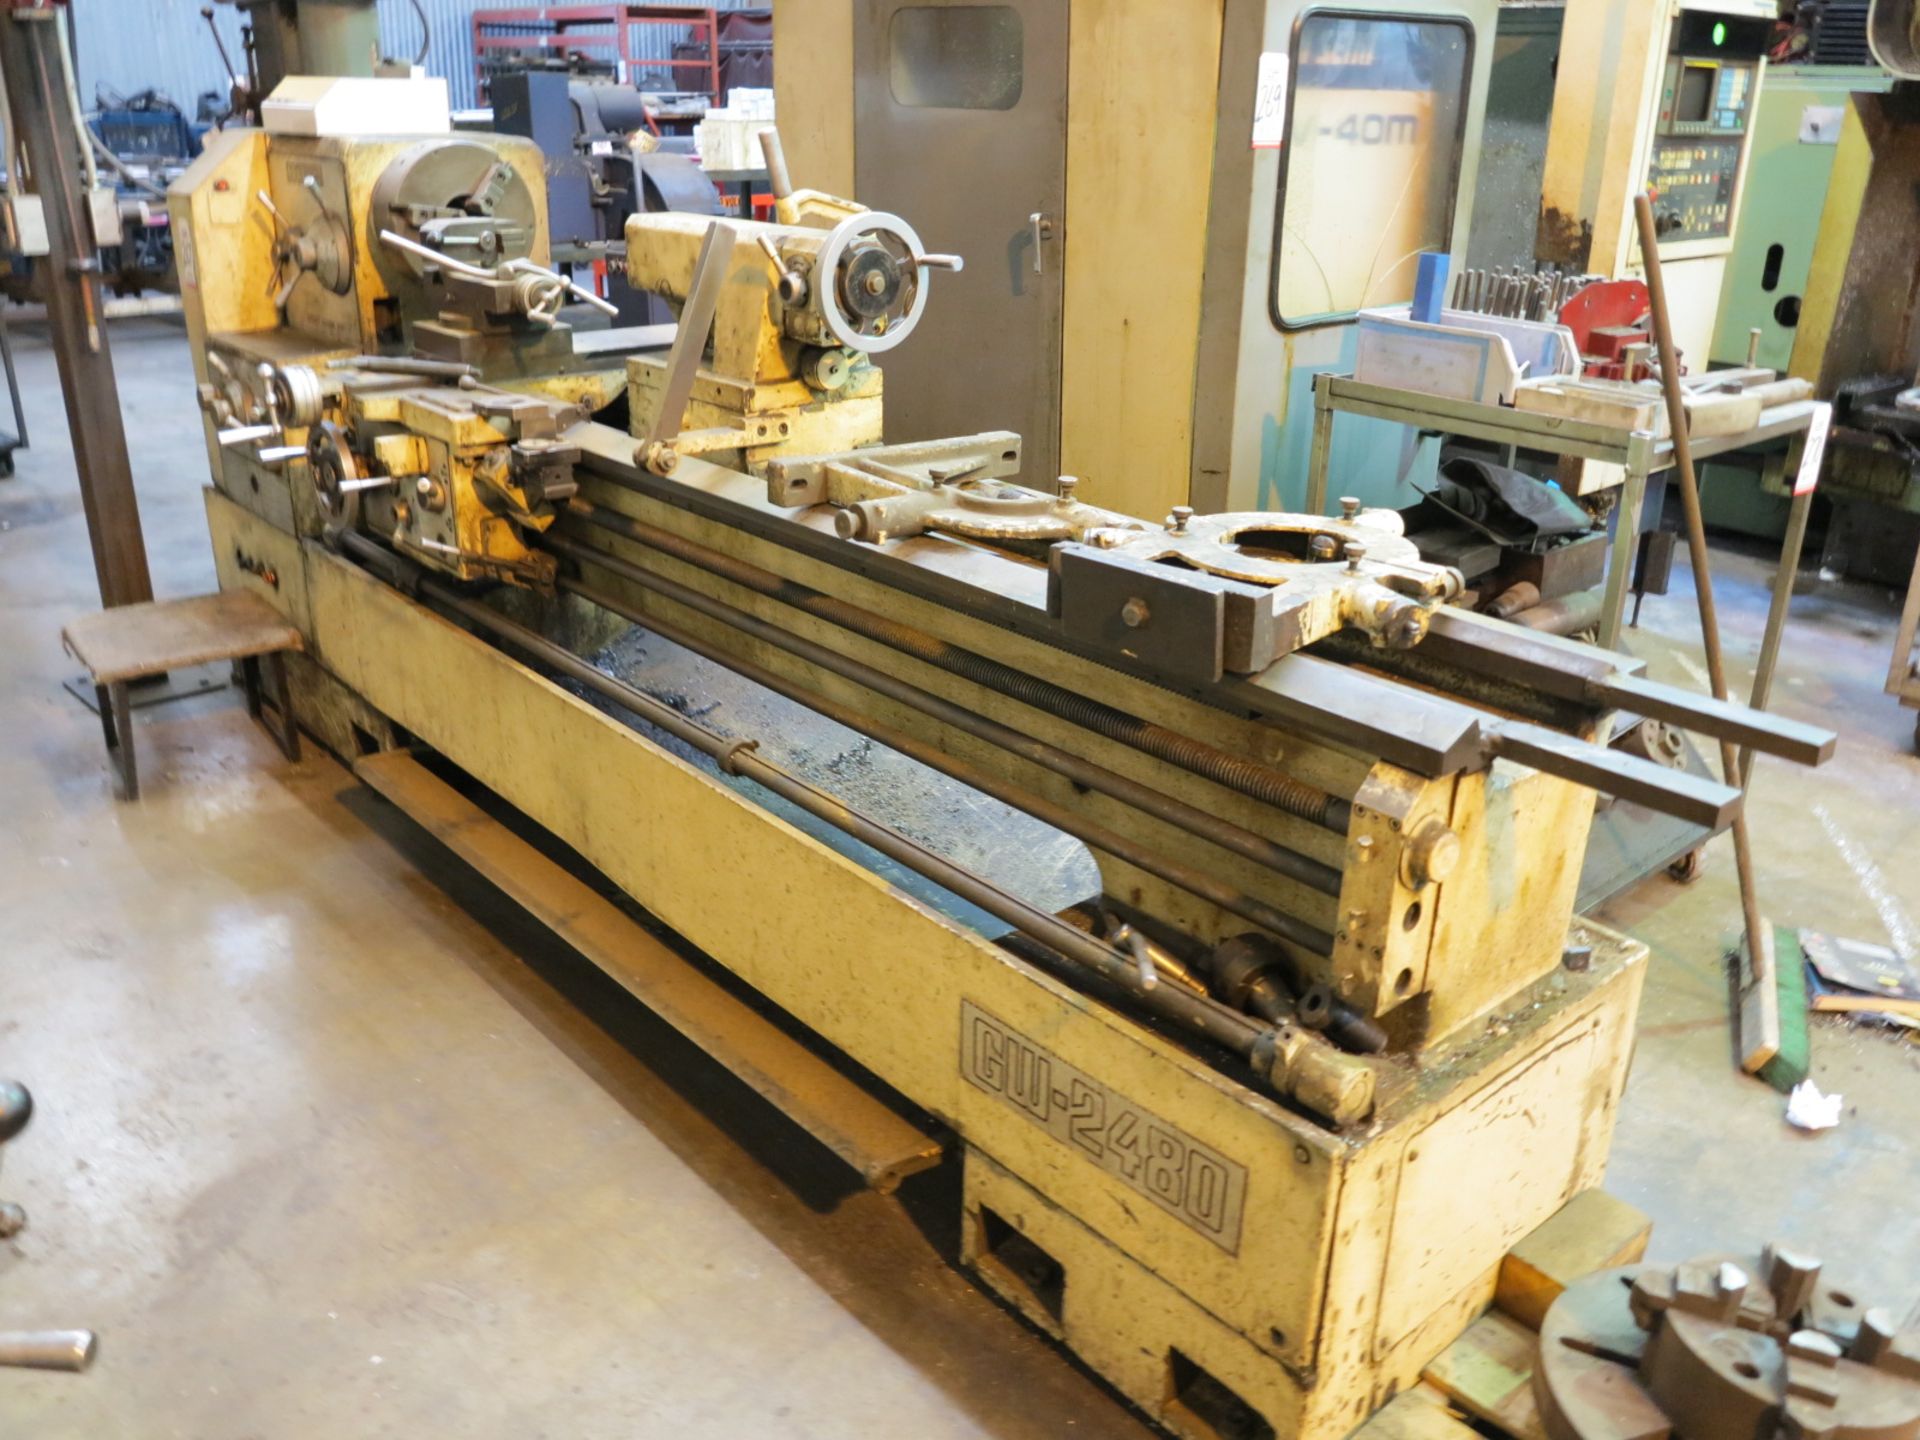 GOODWAY GW-2480 LATHE, 24" X 80", 12" 3-JAW CHUCK, 3" HOLE THROUGH, TAILSTOCK, STEADY REST, ETC. - Image 2 of 5